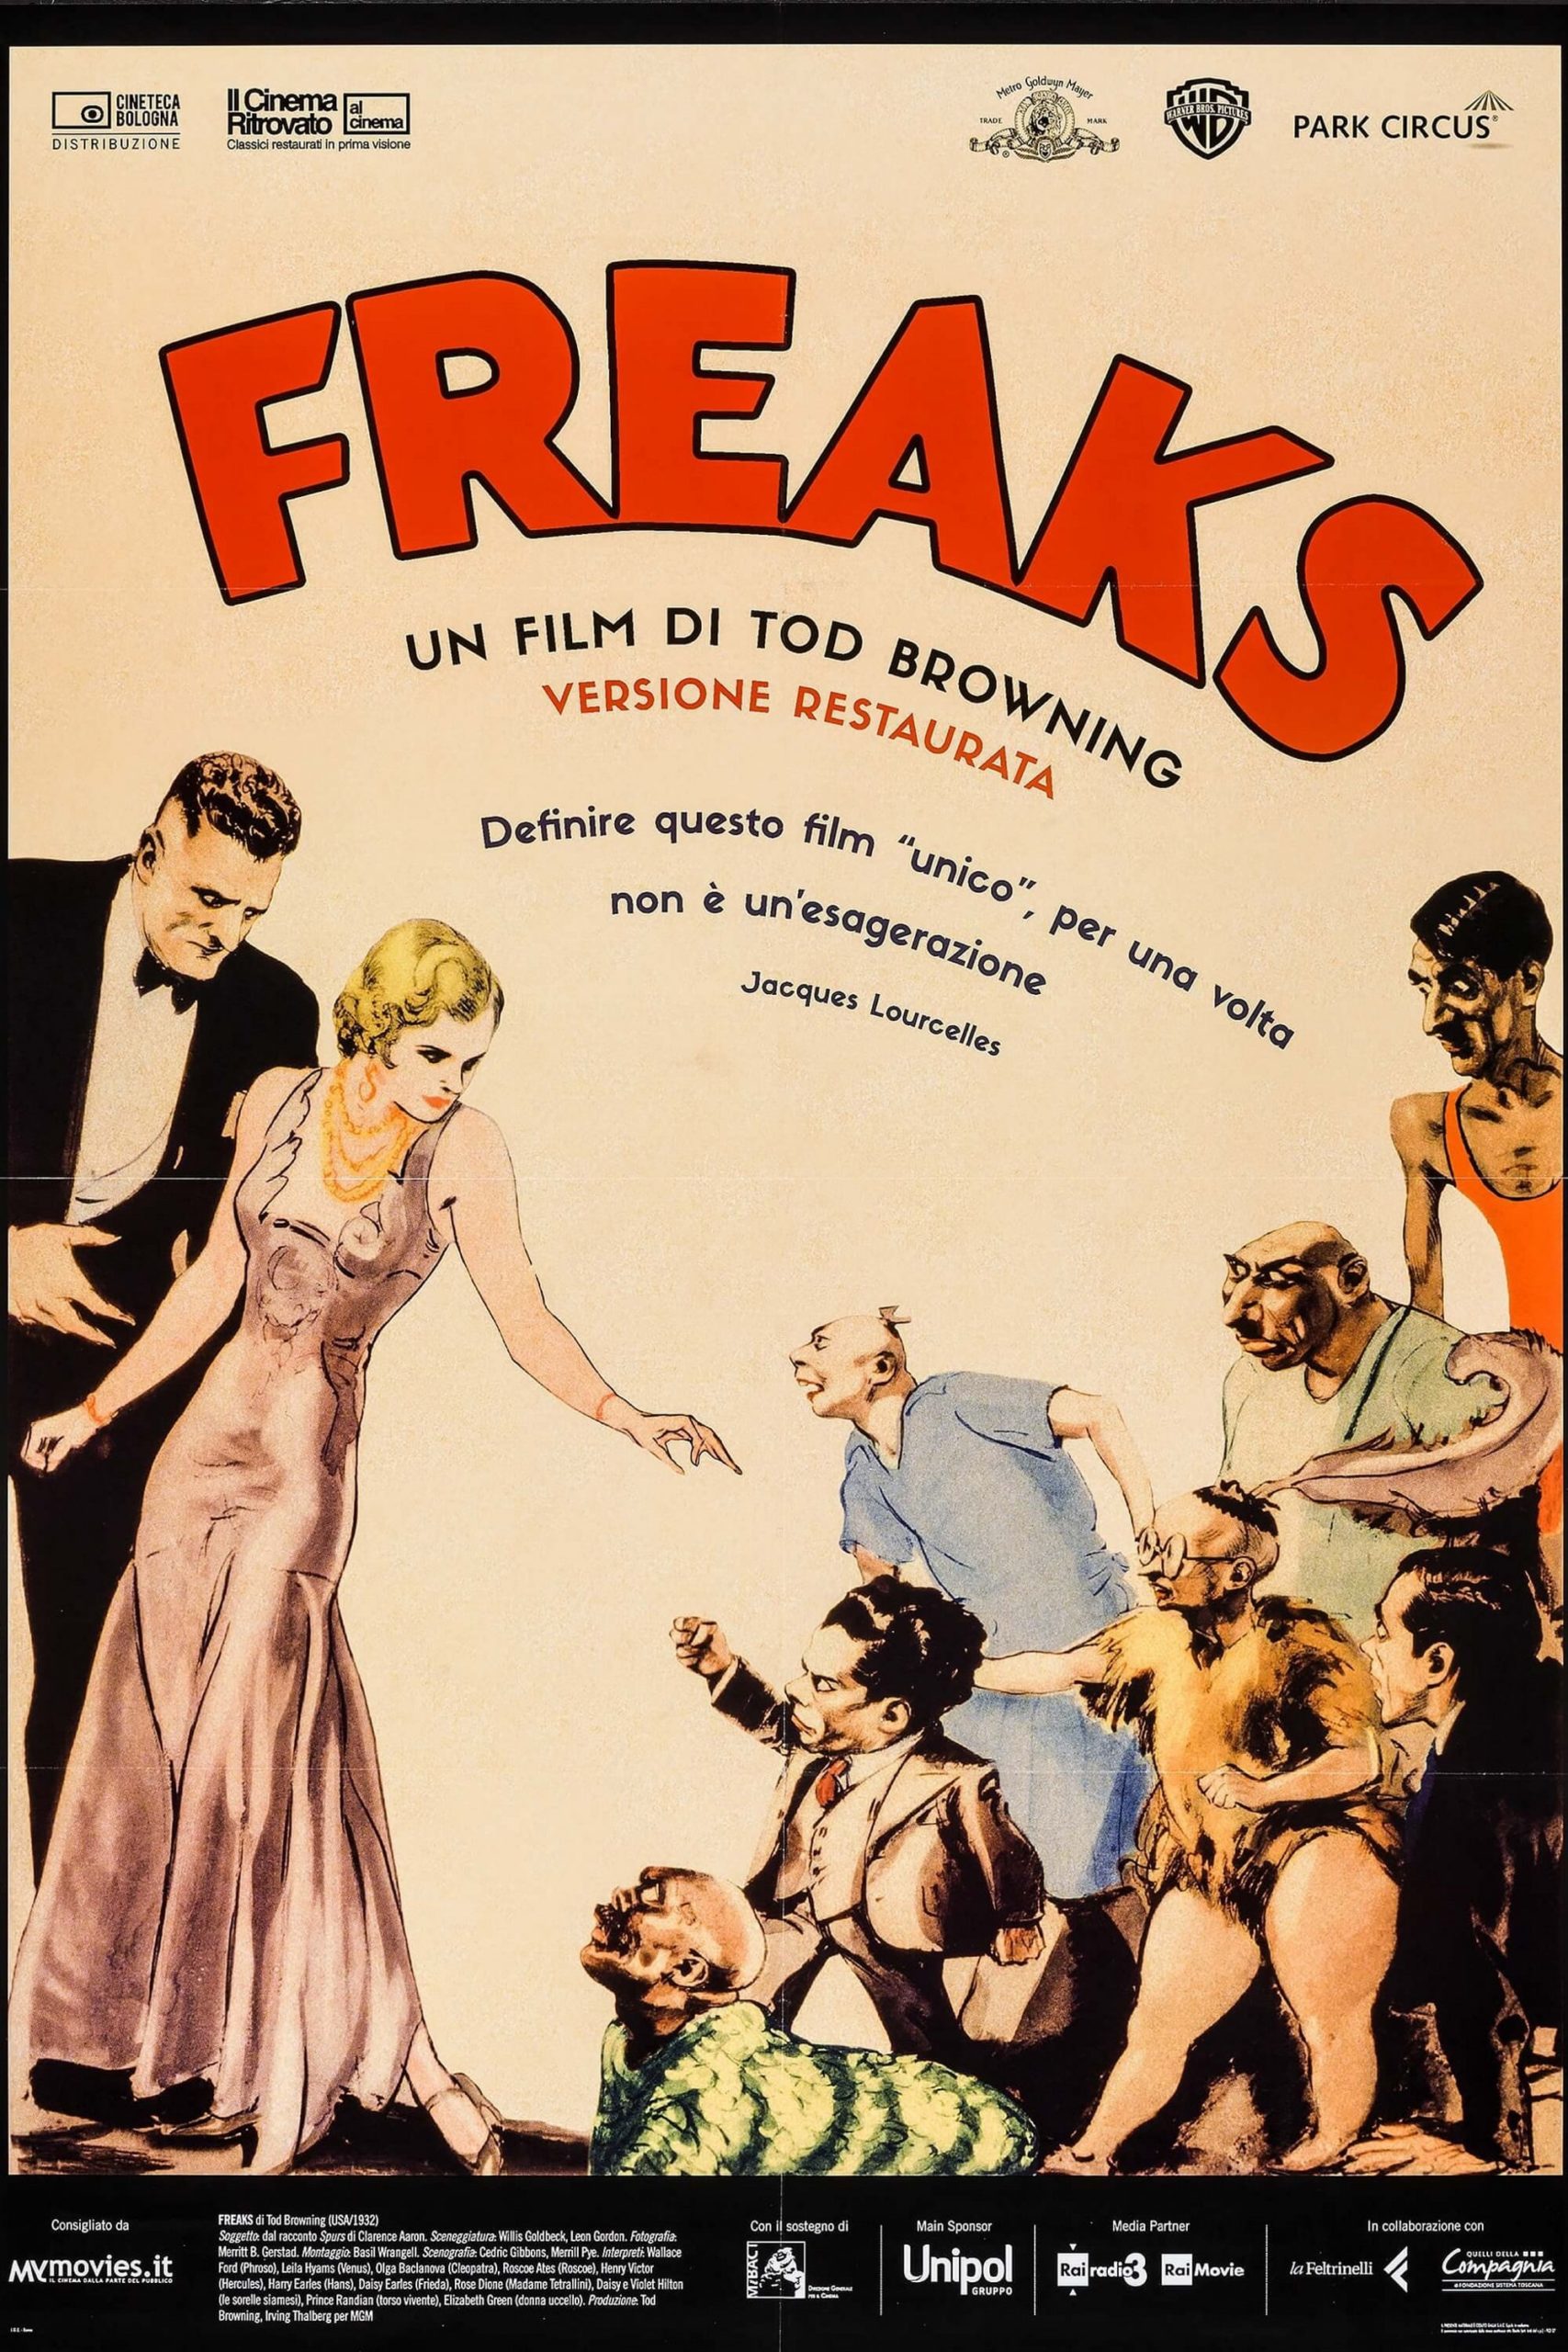 Poster for the movie "Freaks"